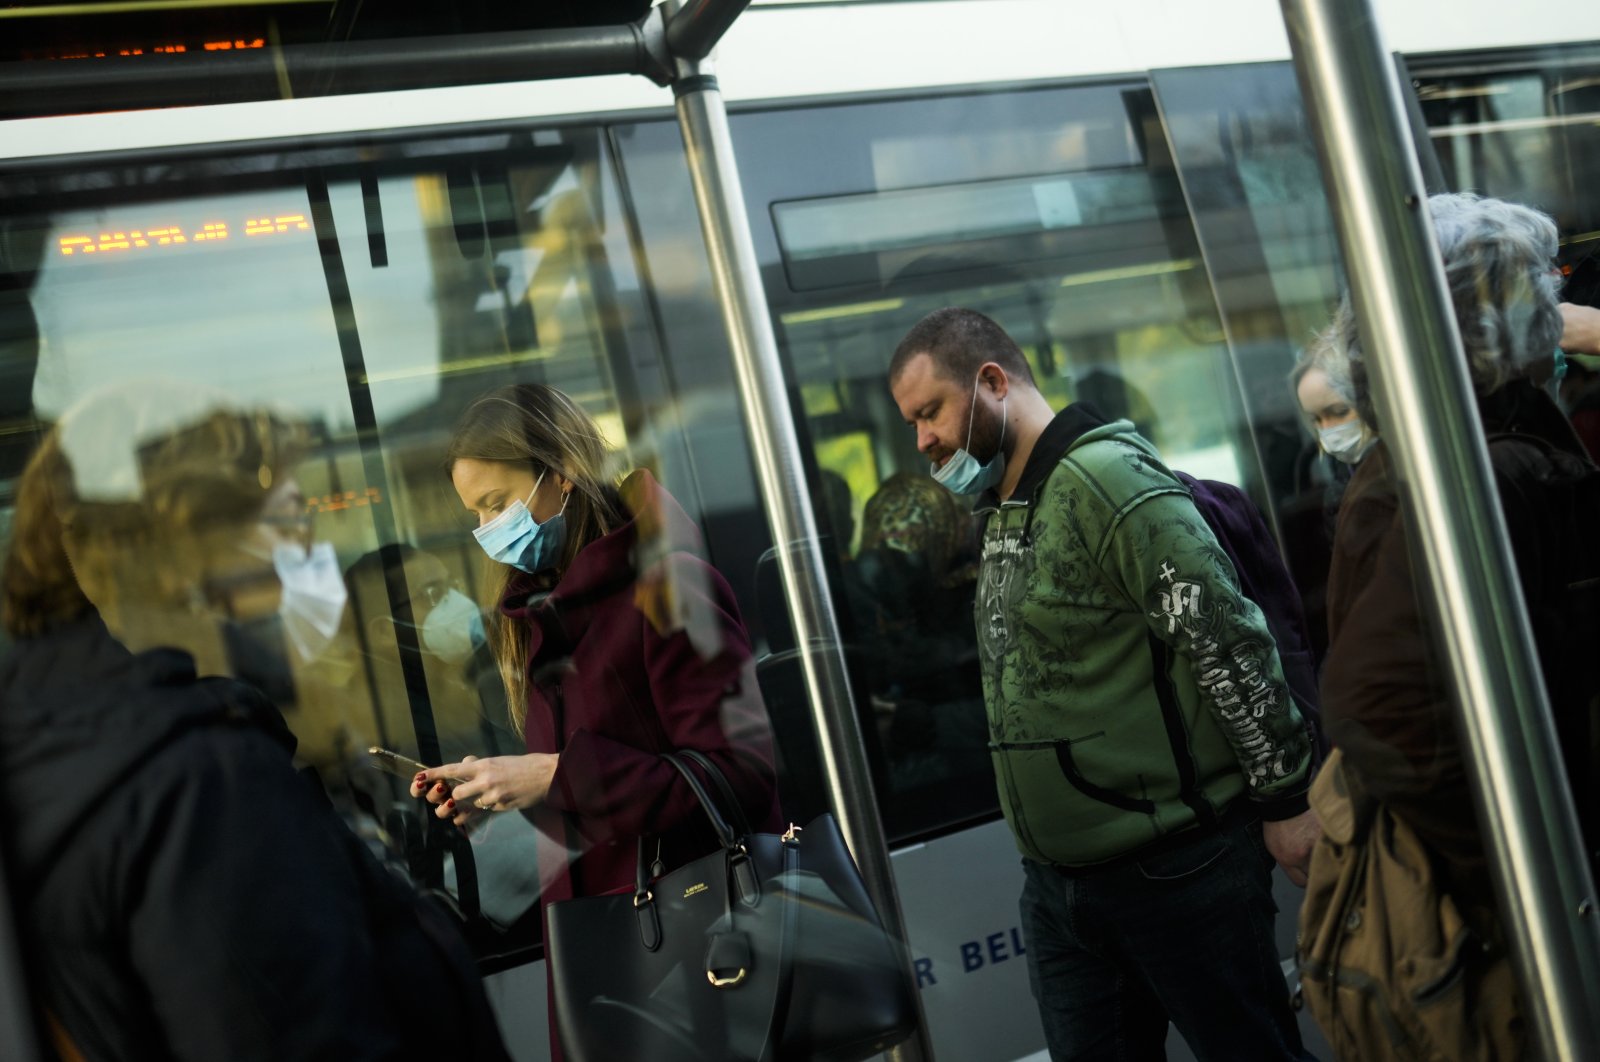 Commuters, wearing protective face masks to prevent the spread of COVID-19, disembark a streetcar in Istanbul, Turkey, Dec. 27, 2021. (AP PHOTO)